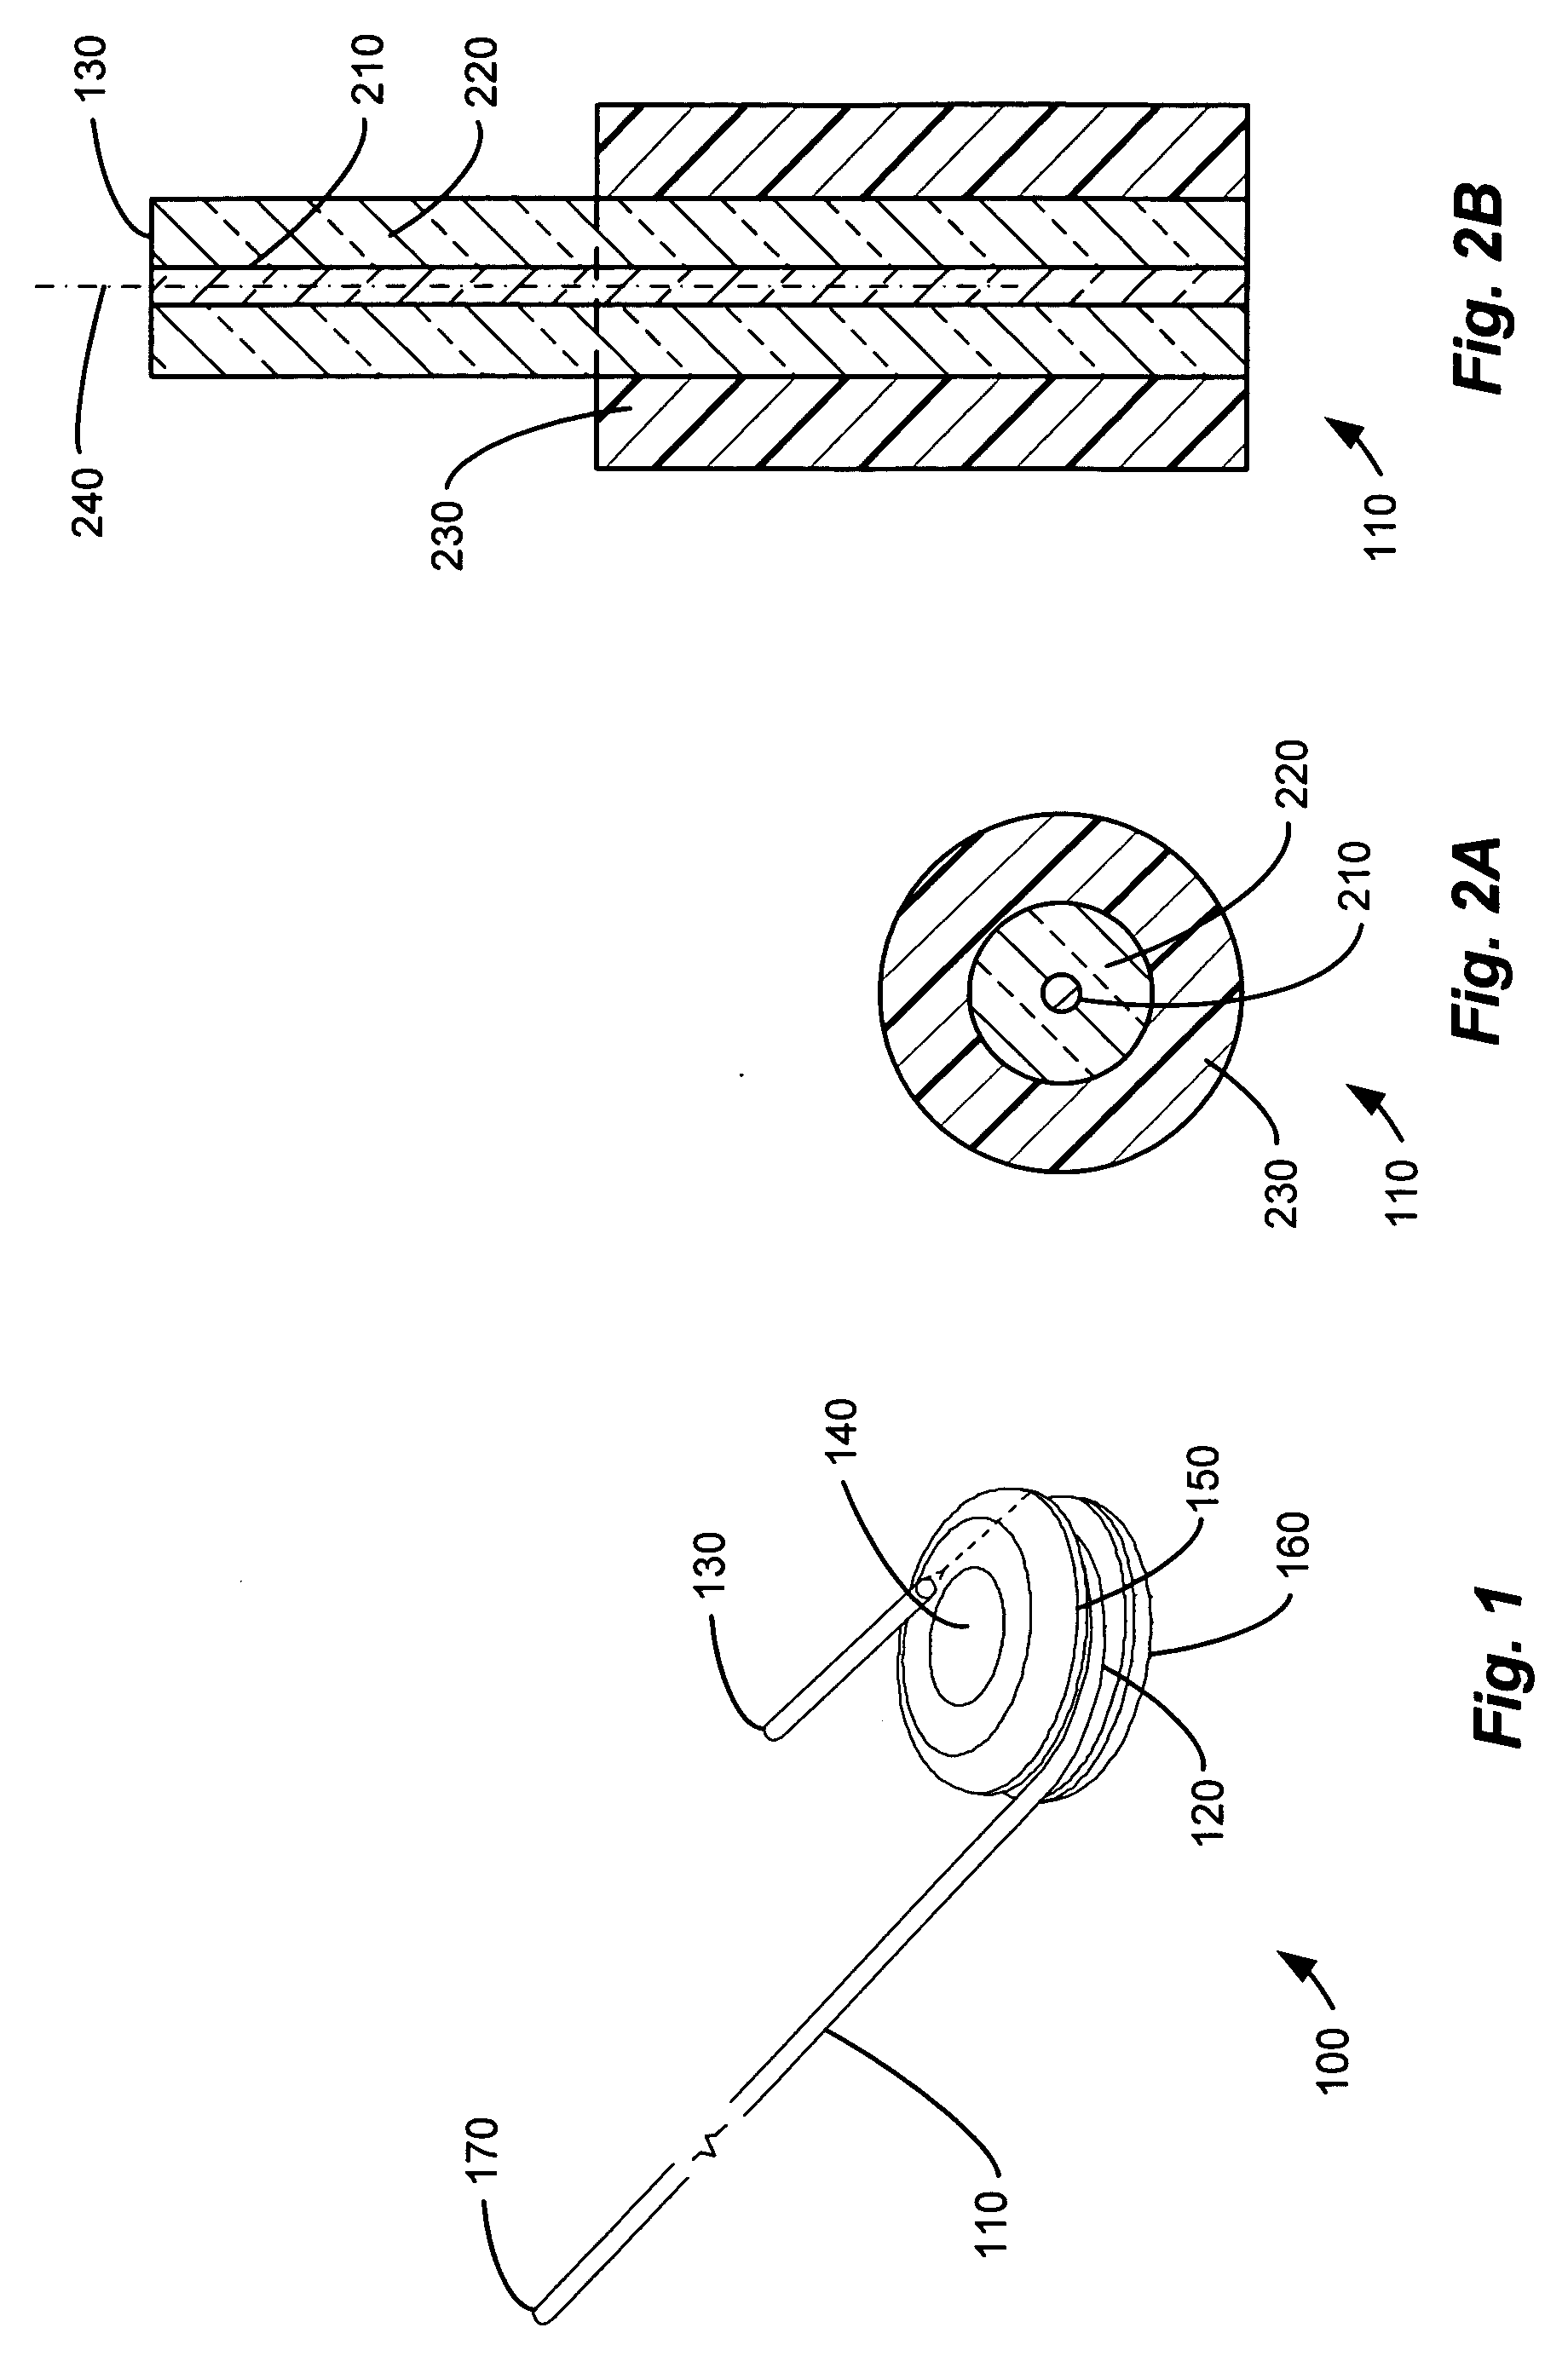 Reflection suppression for an optical fiber